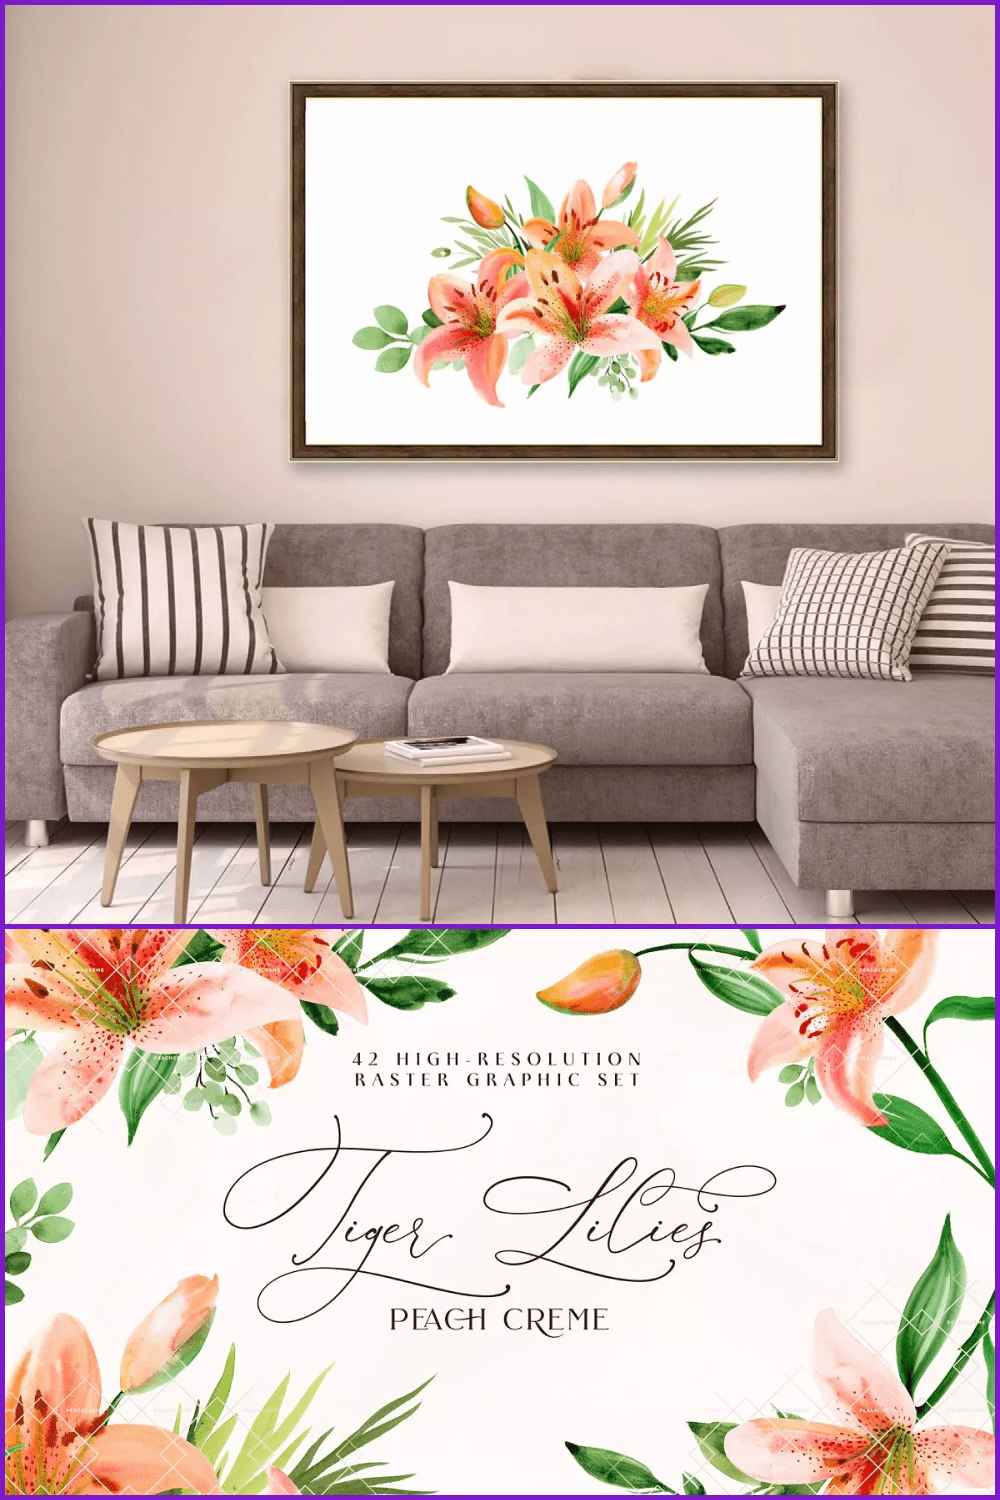 Painting with tiger lilies in interior.